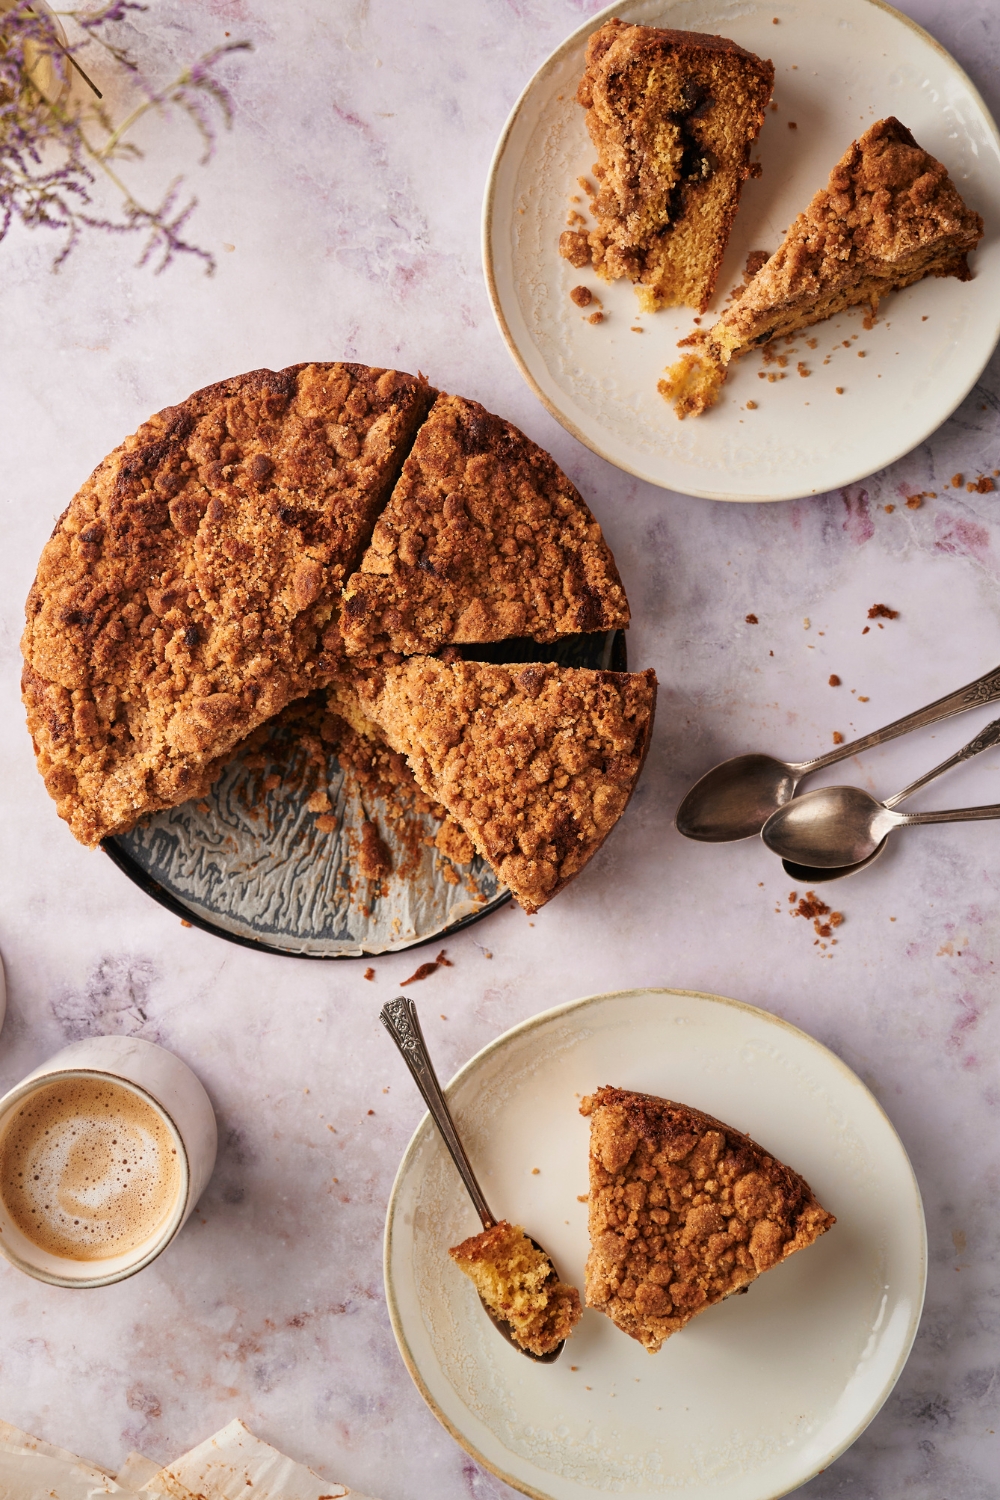 An overhead view of coffee cake on a pan with a slice taken out of it. A plate is sitting next to the pan with a slice of coffee cake on it with a spoonful of coffee cake next to it.